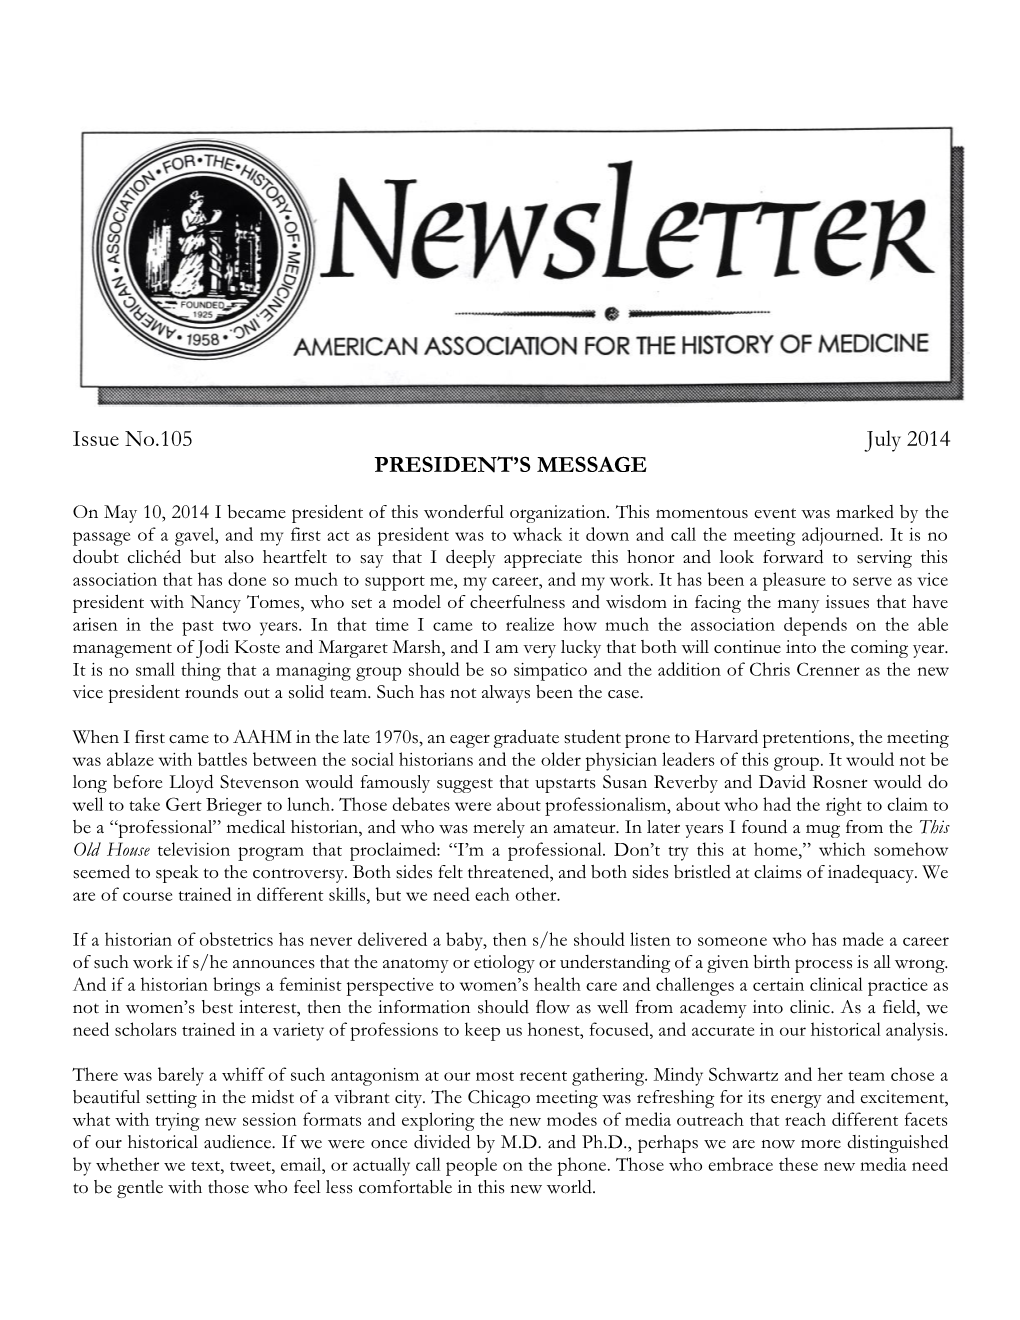 July 2014 PRESIDENT’S MESSAGE